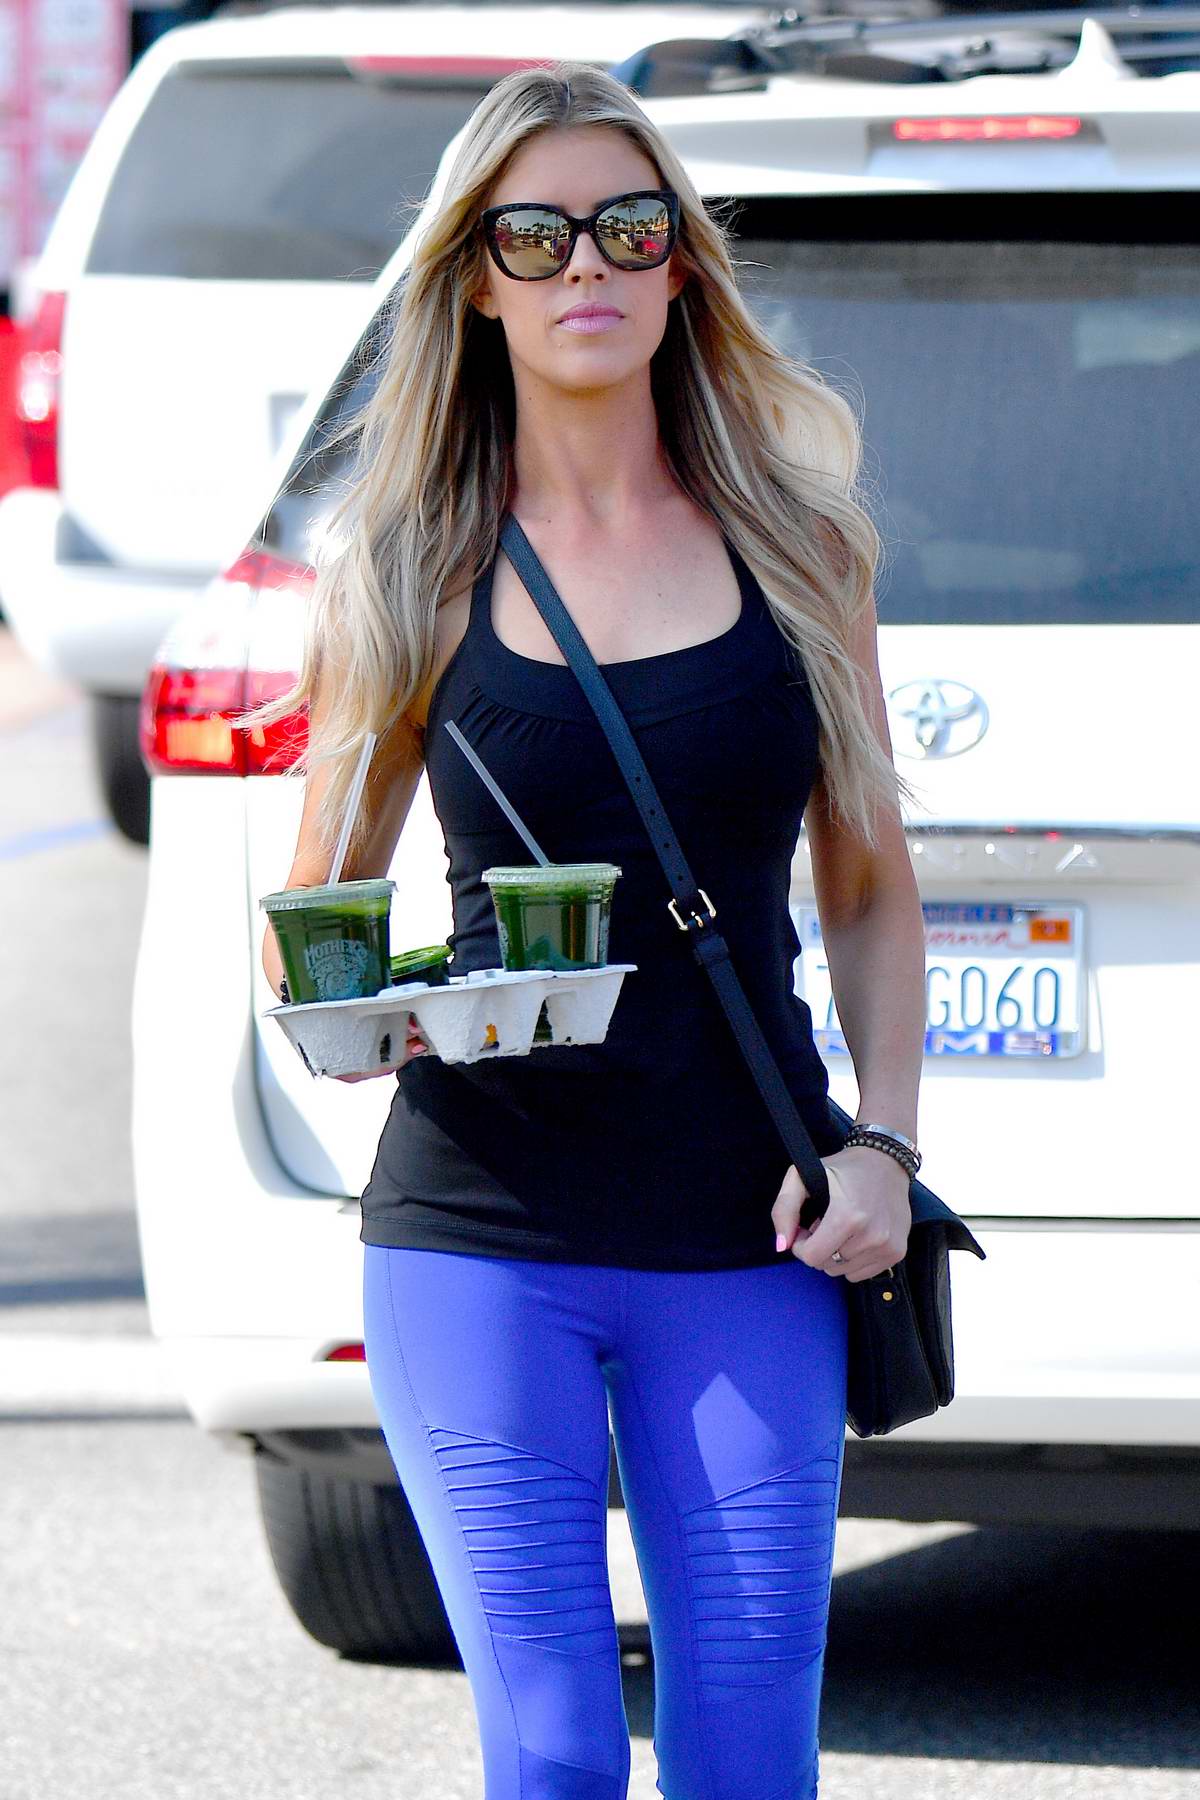 Christina El Moussa LAX Airport March 11, 2021 – Star Style